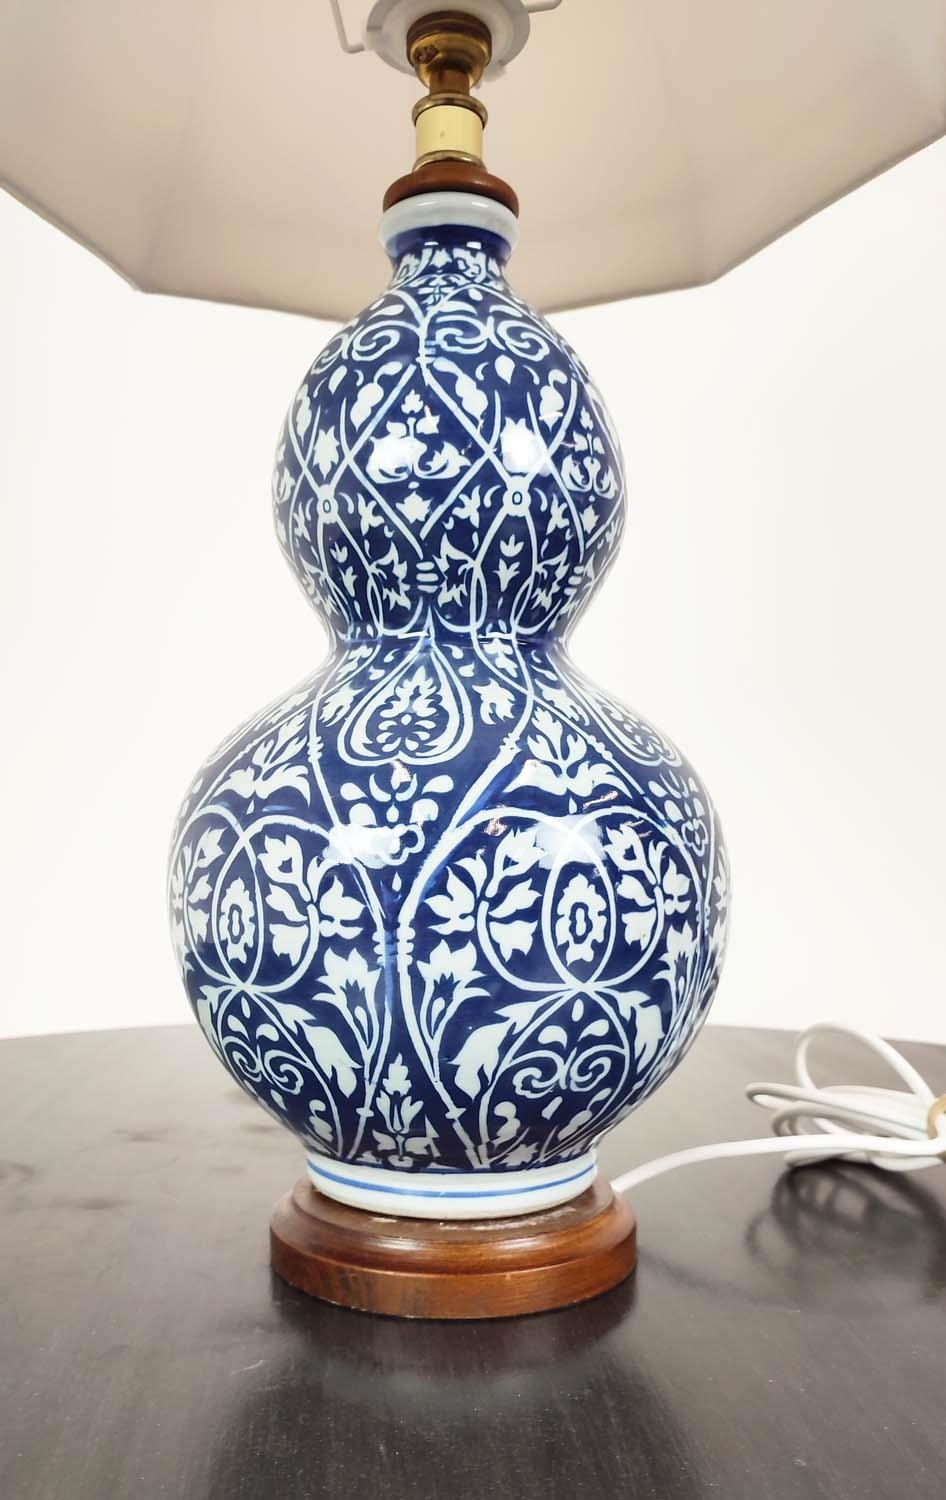 LAUREN RALPH LAUREN HOME TABLE LAMPS, a pair, blue and white double gourd ceramic, with shades, 72cm - Image 3 of 7